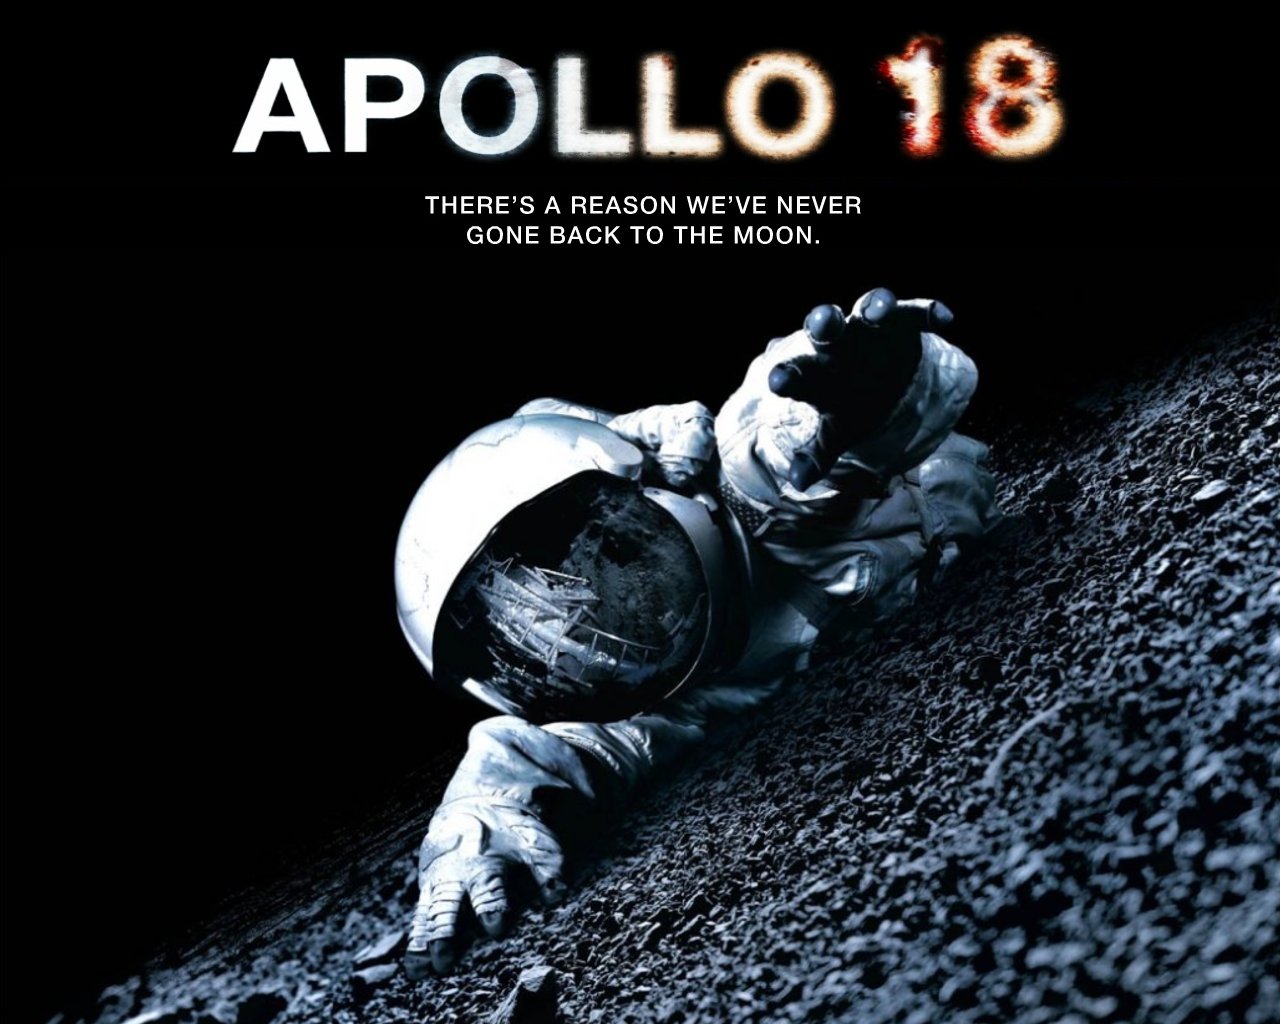 ... wallpapers | Hollywood movies wallpapers: Apollo 18 hd wallpapers